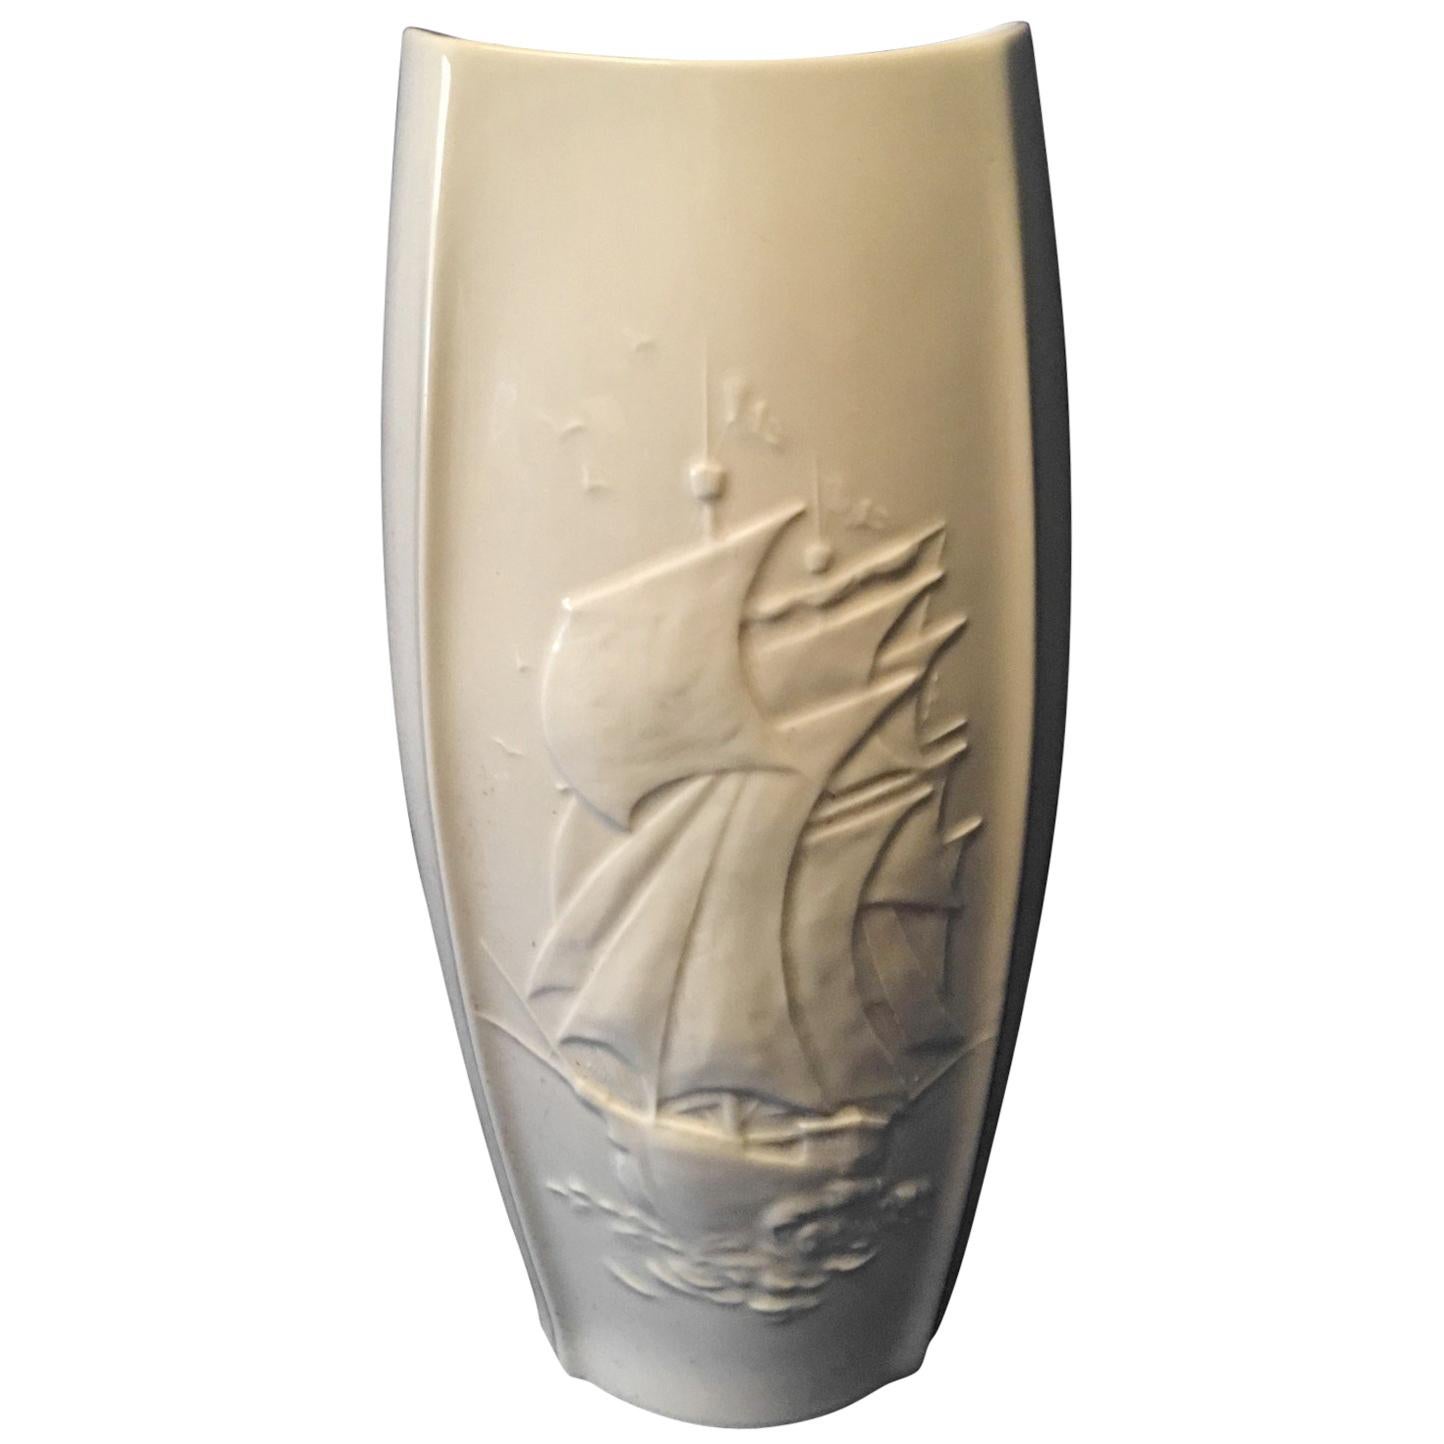 Large 1960s White Vase Sailing Ship by Schumann of Arzberg in Bavaria, Germany For Sale